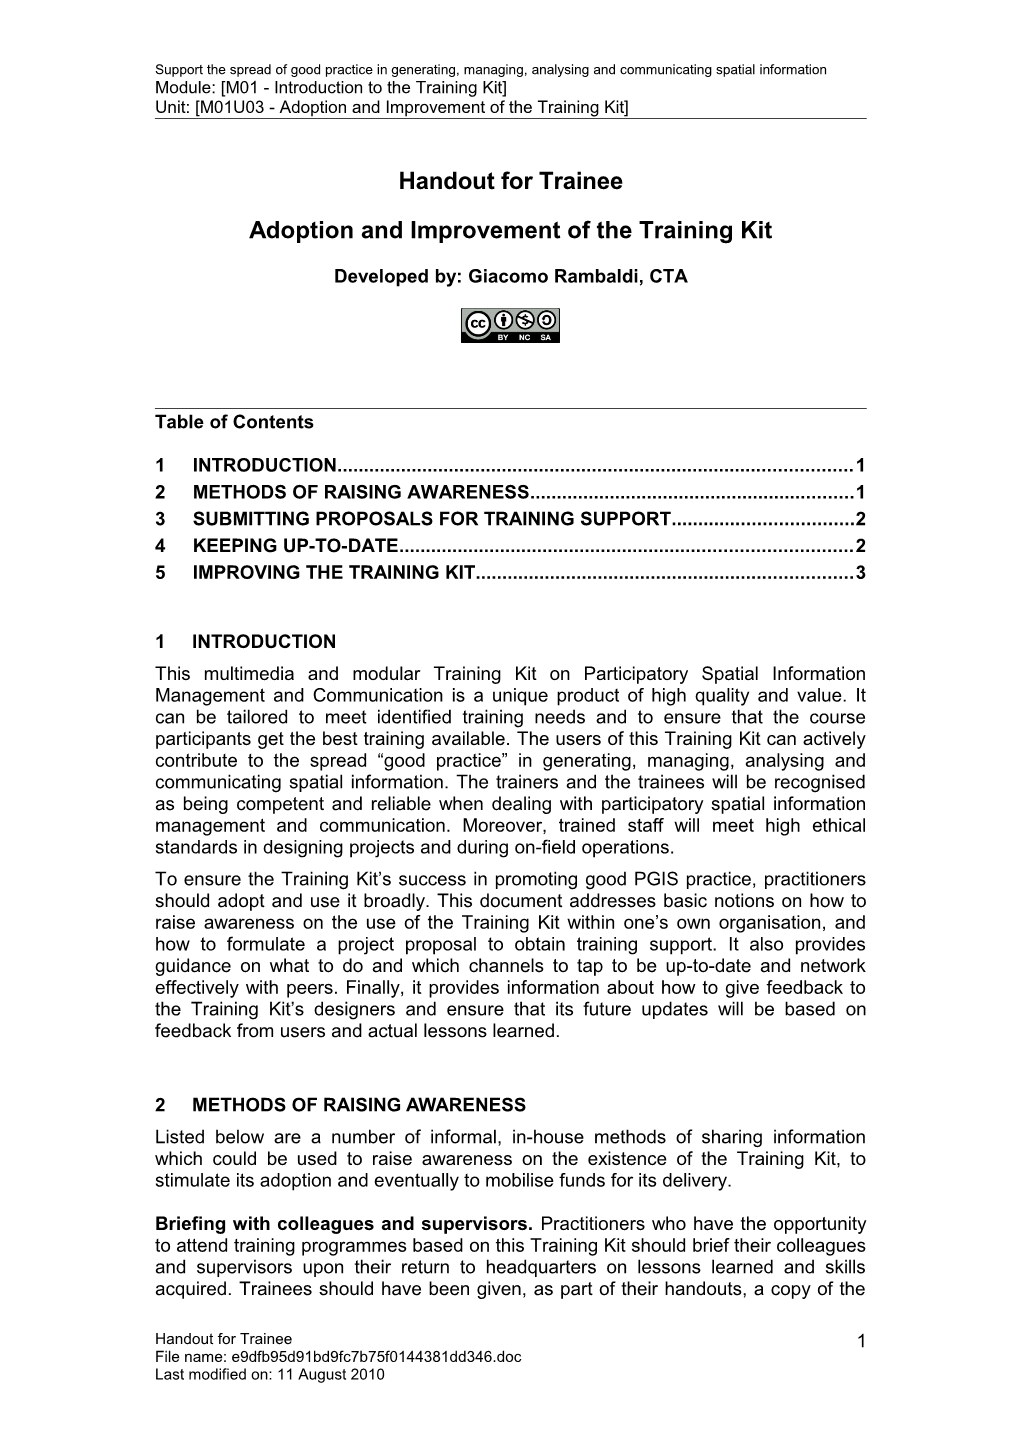 Handout for Trainee - Adoption and Improvement of the Training Kit